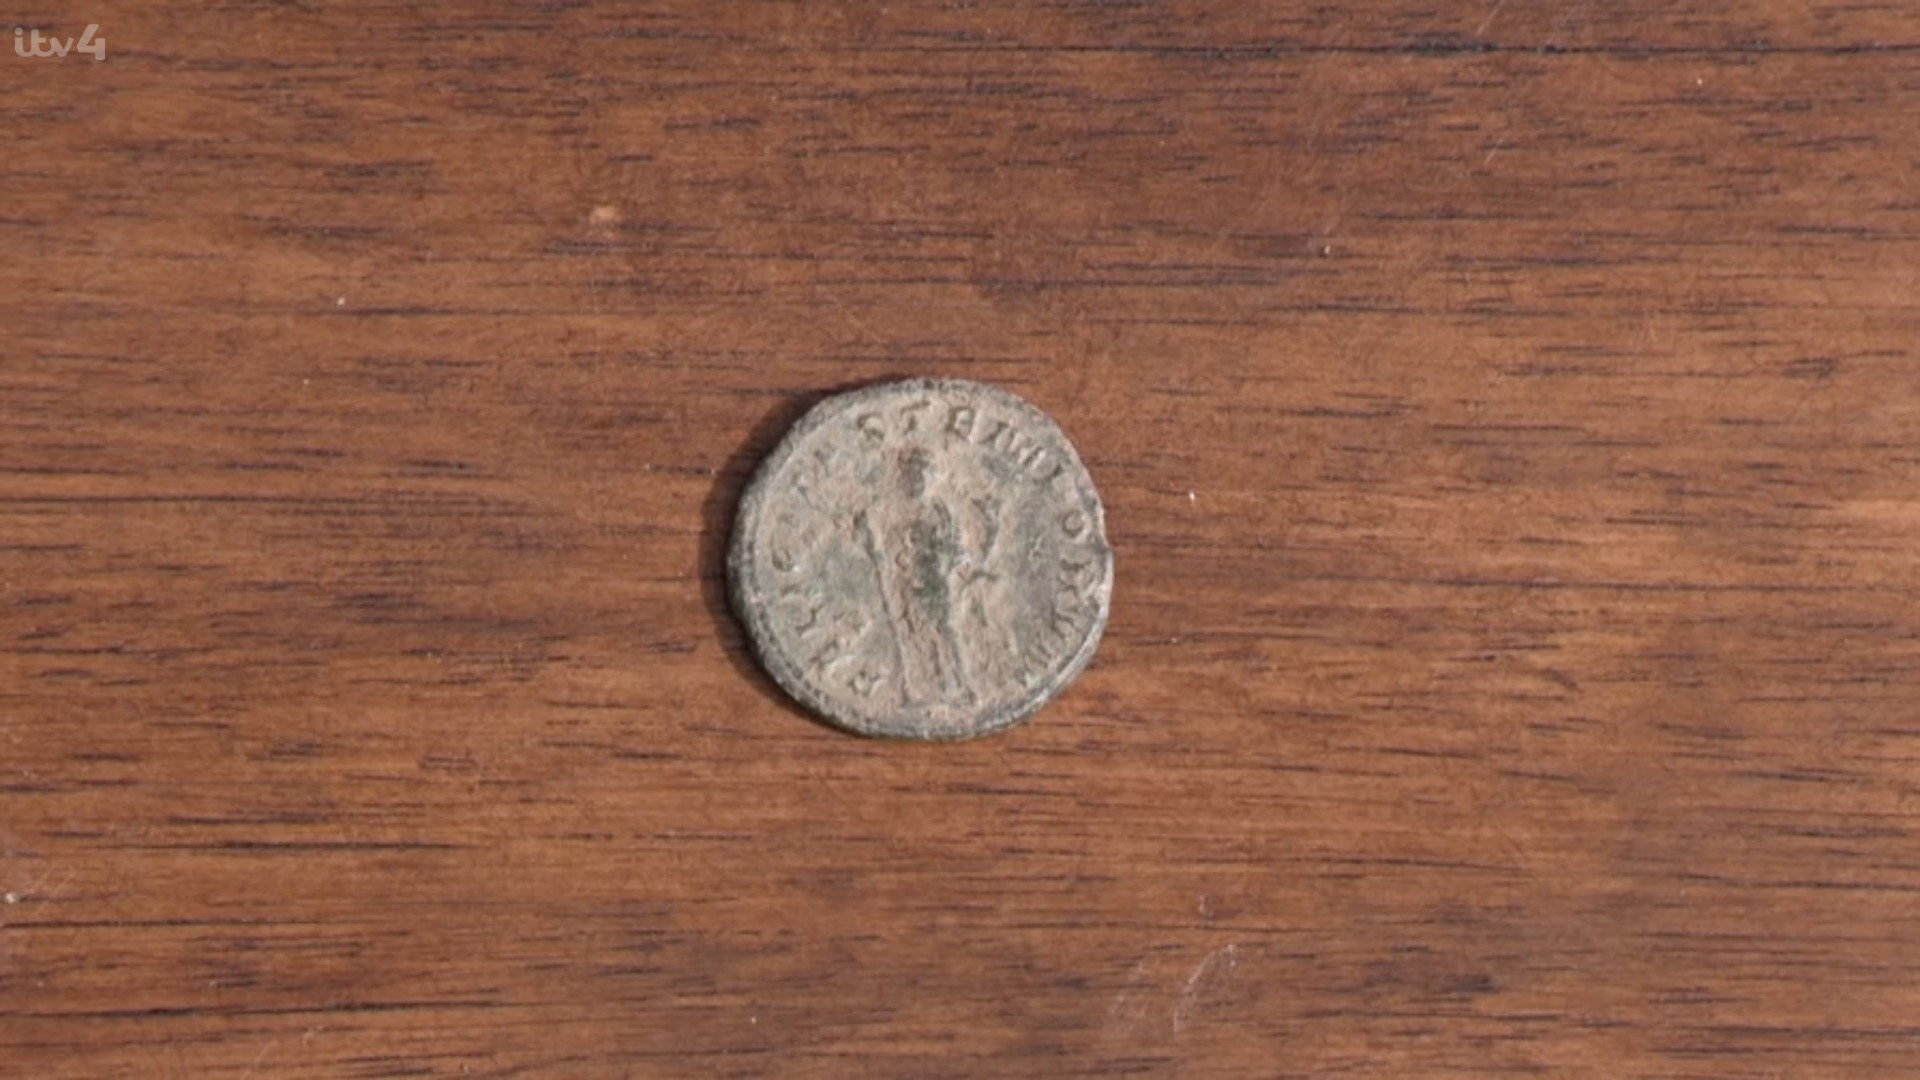 FIND: Roman coin dating back to 260 AD